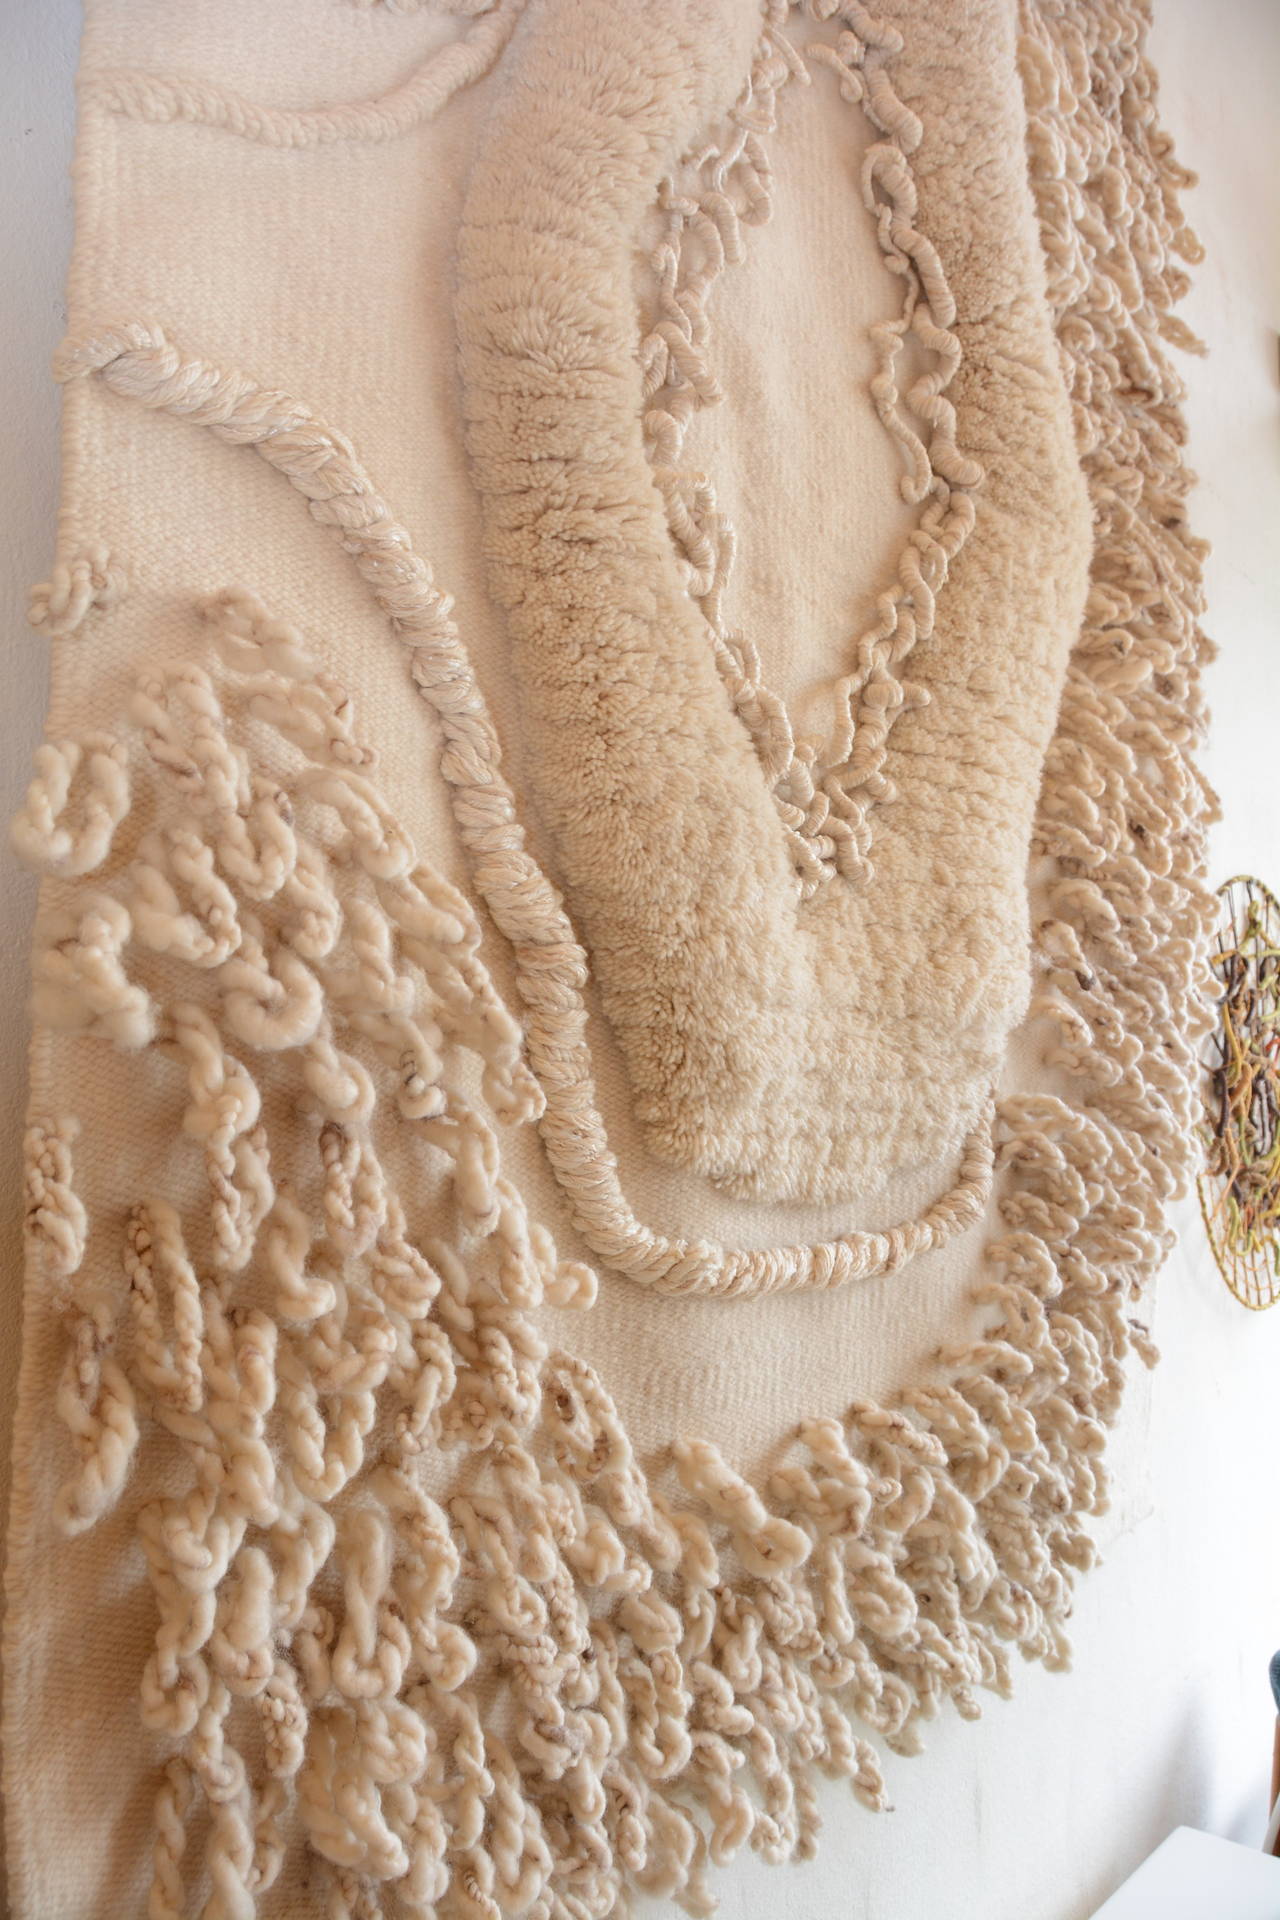 Hand-Knotted Enormous White Wool Fiber Art from Robert Kidd Studios, circa 1975 For Sale